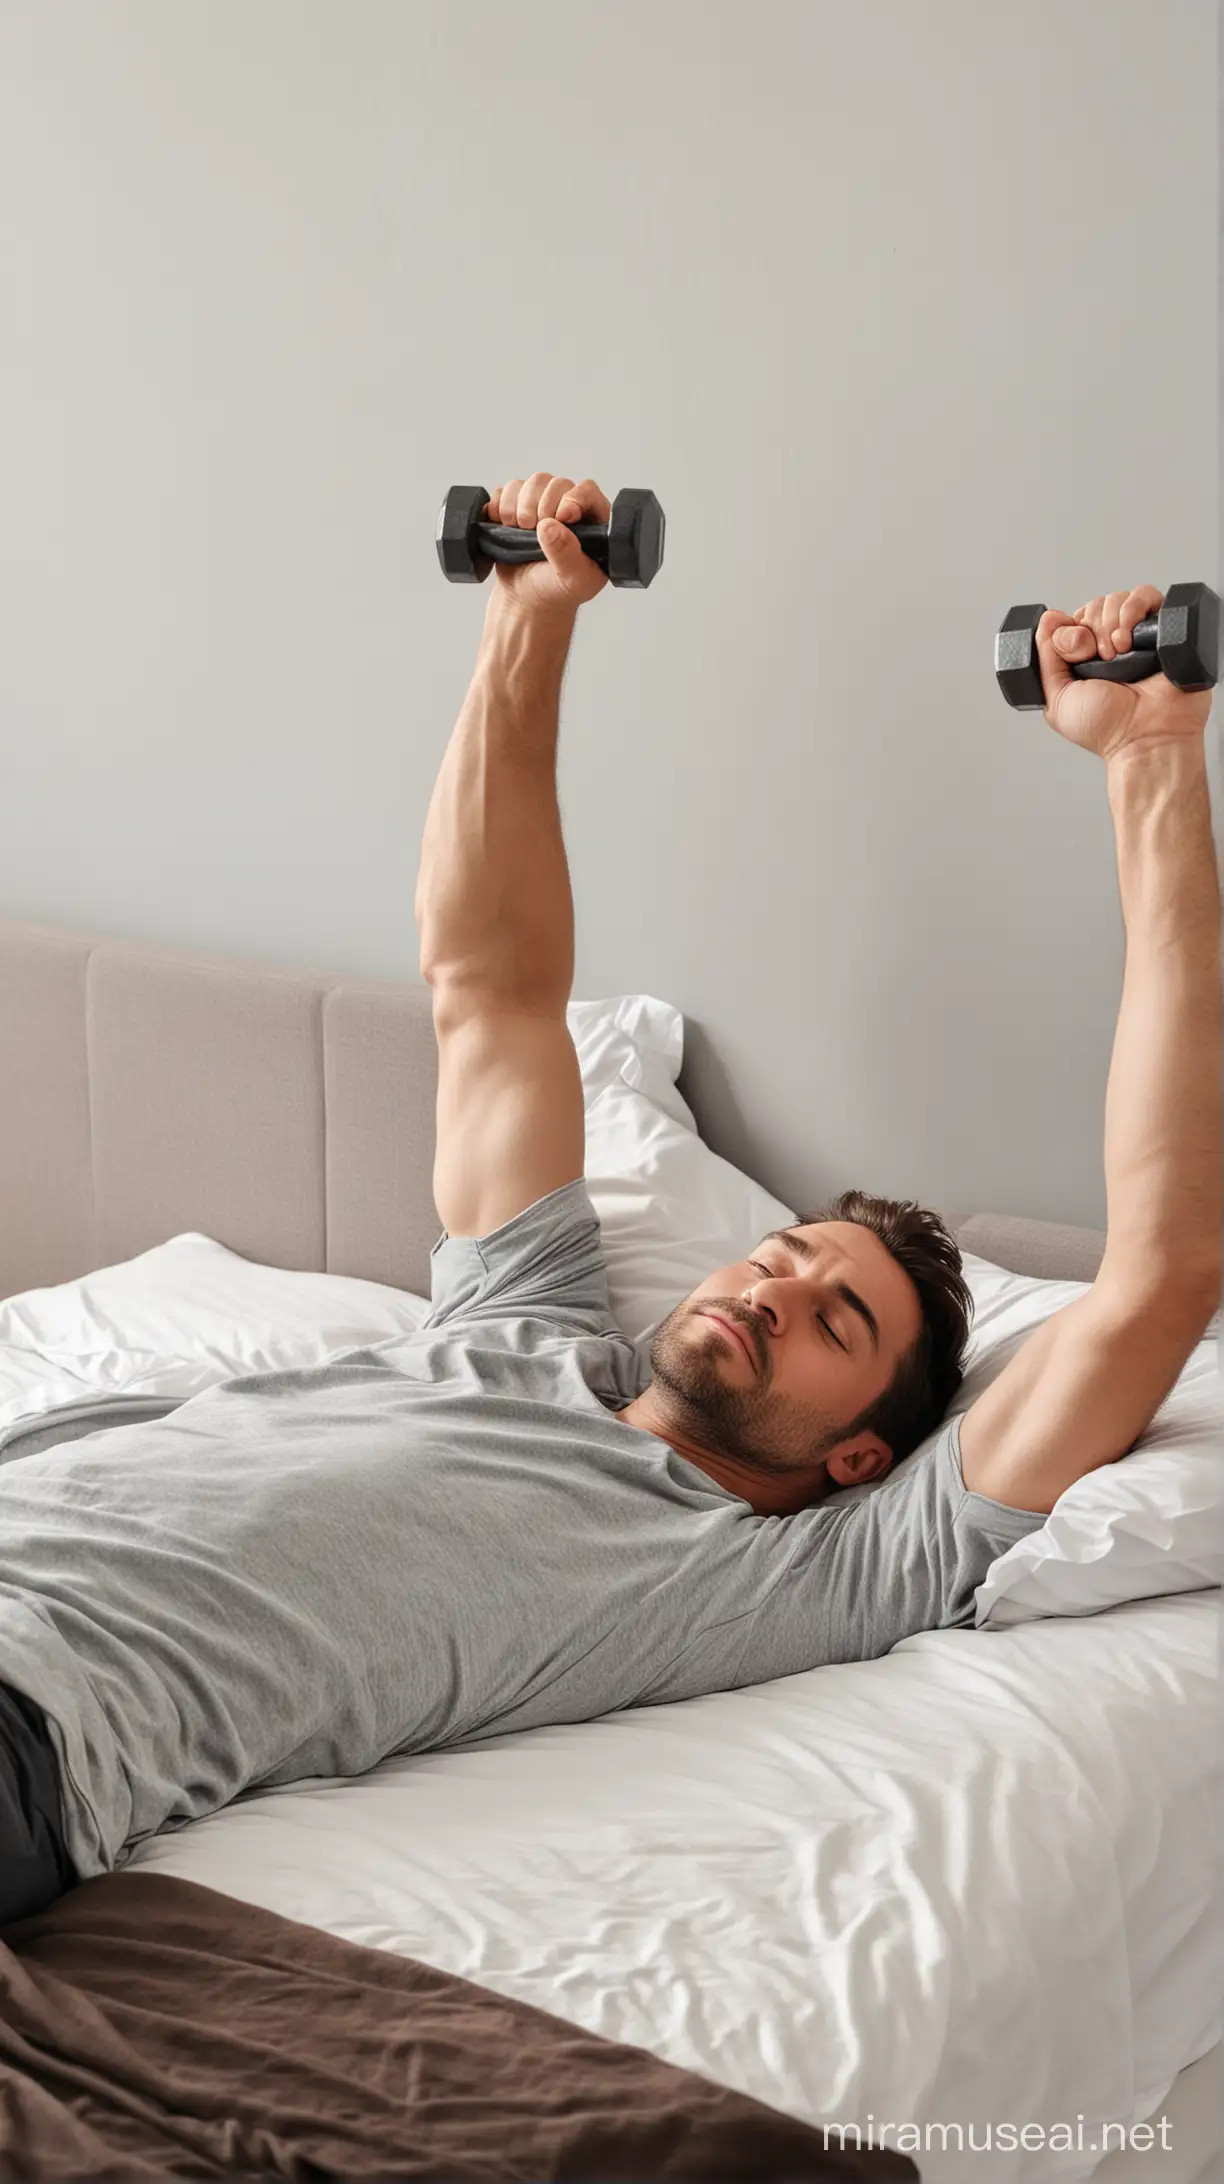 Man Sleeping in Bed Lifts Weights in Dream